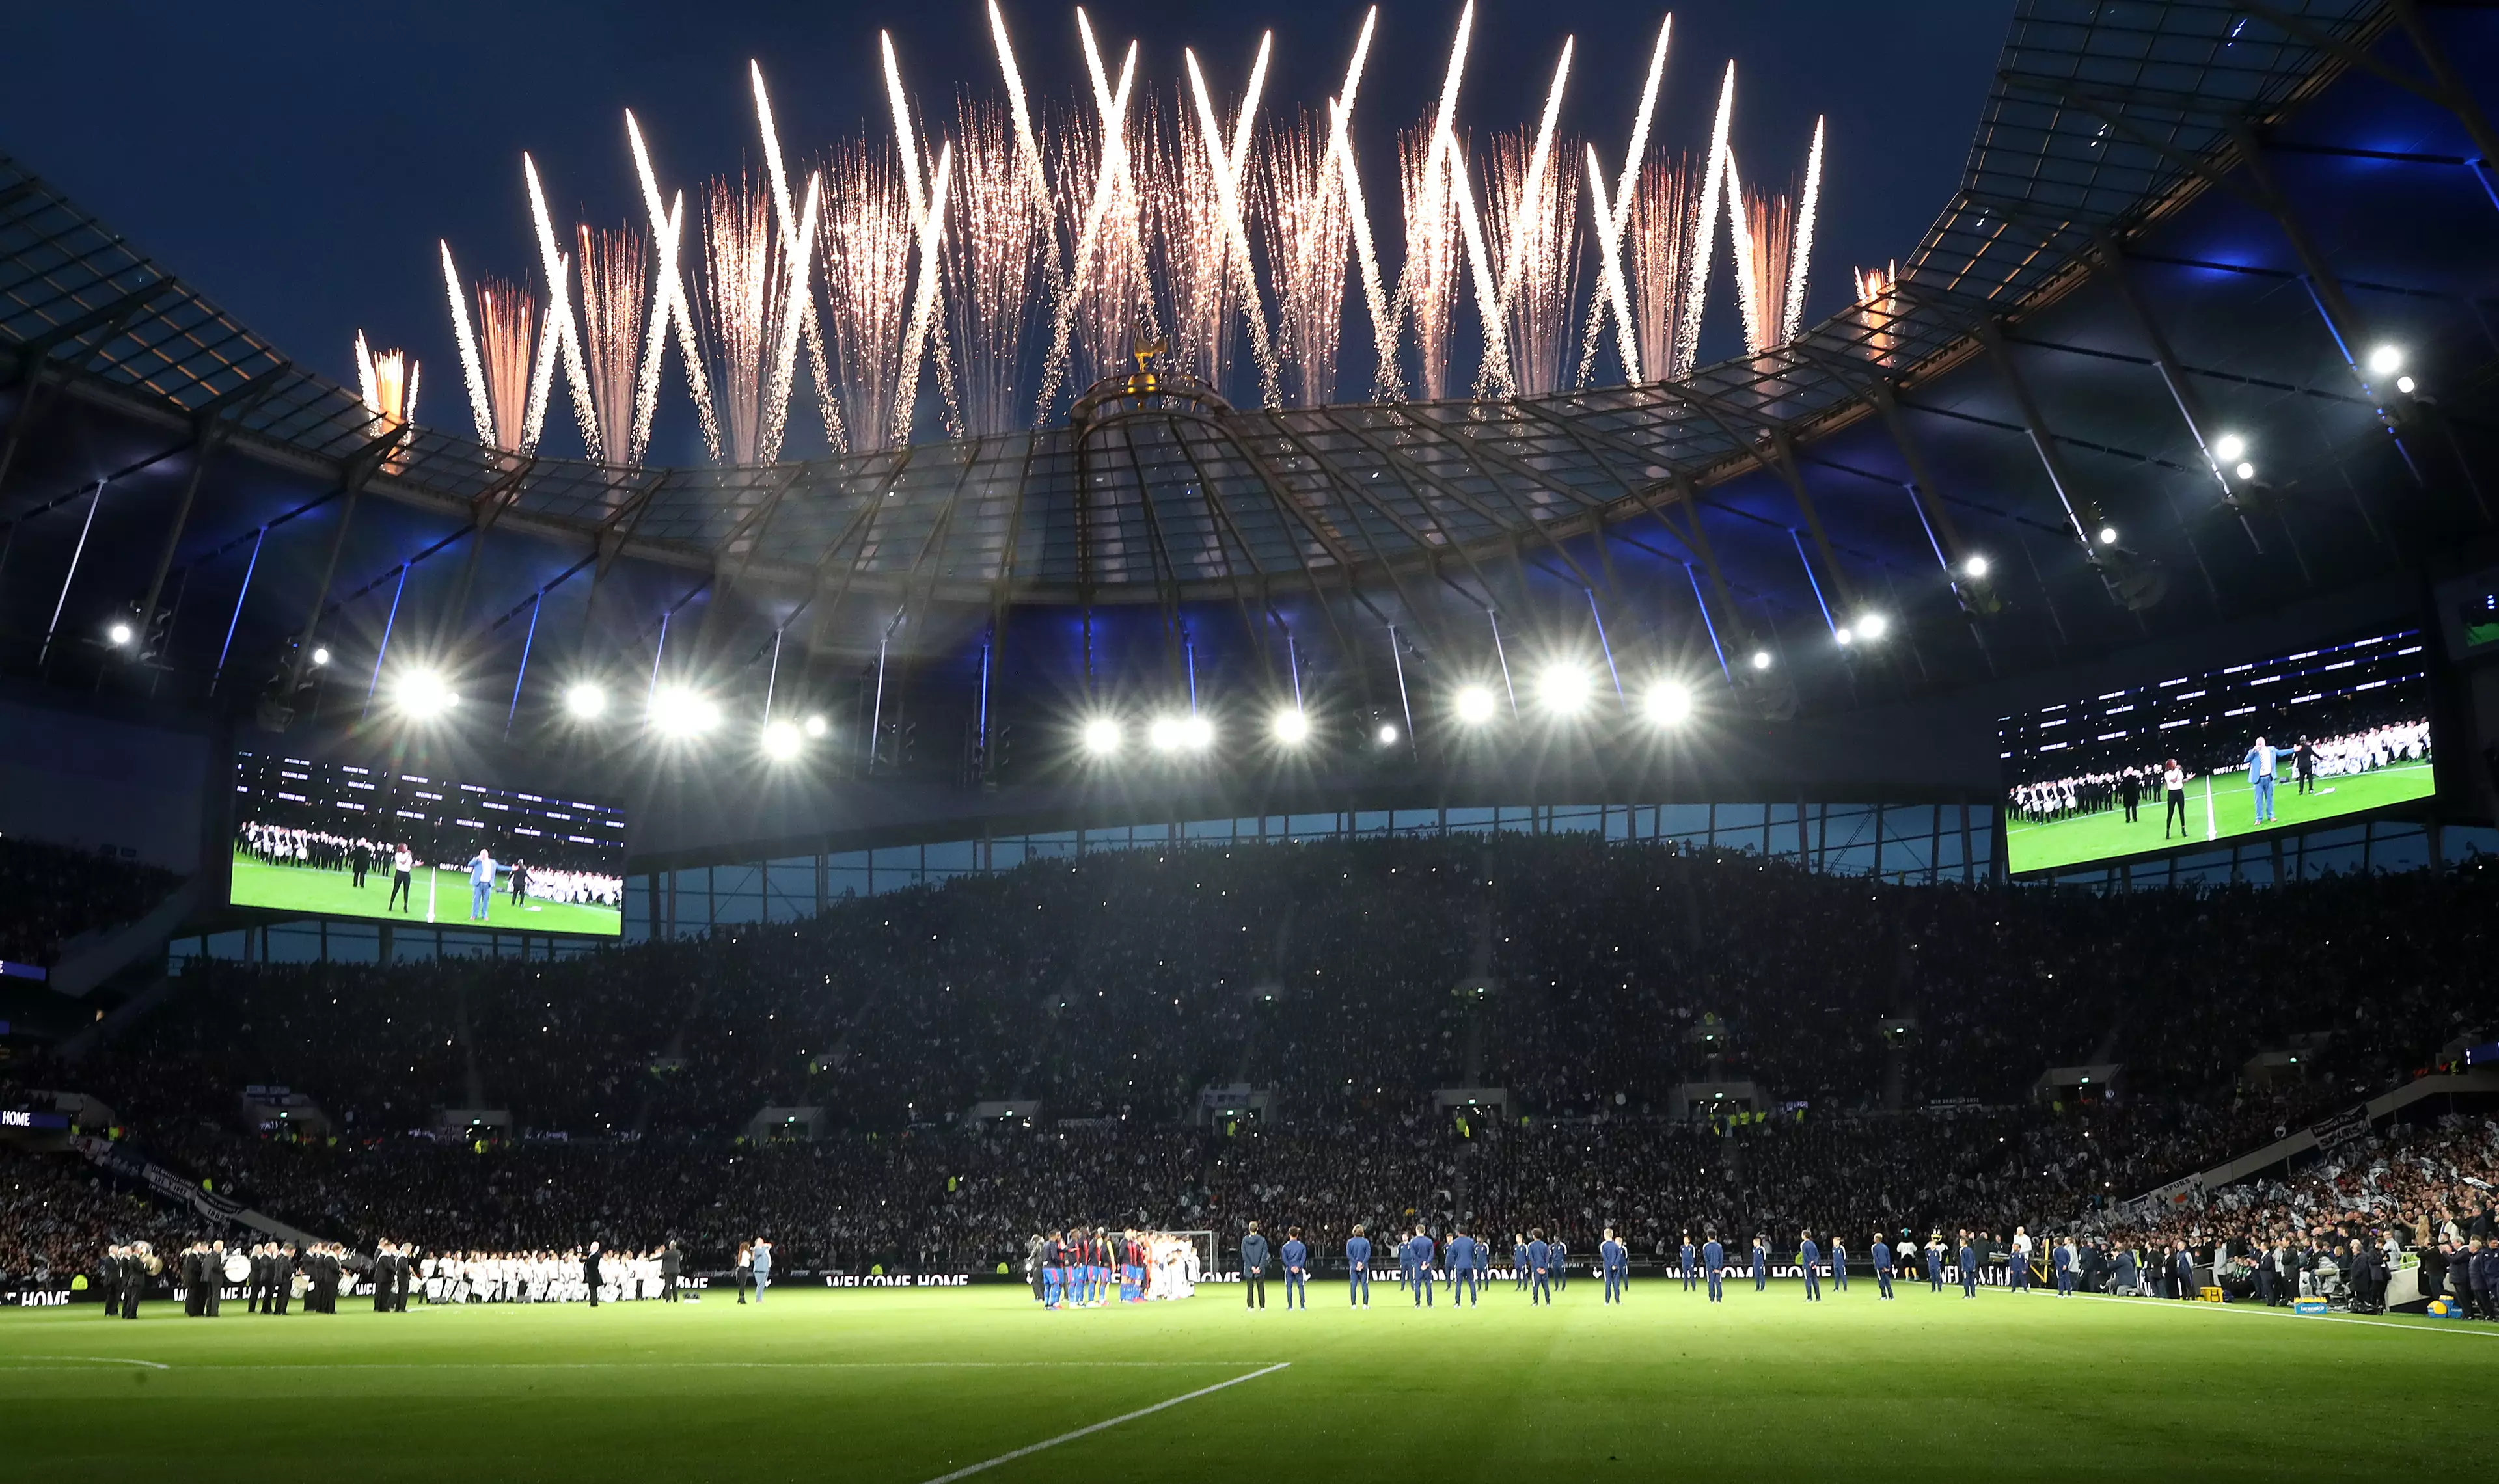 Tottenham's new ground opened with a bang. Image: PA Images